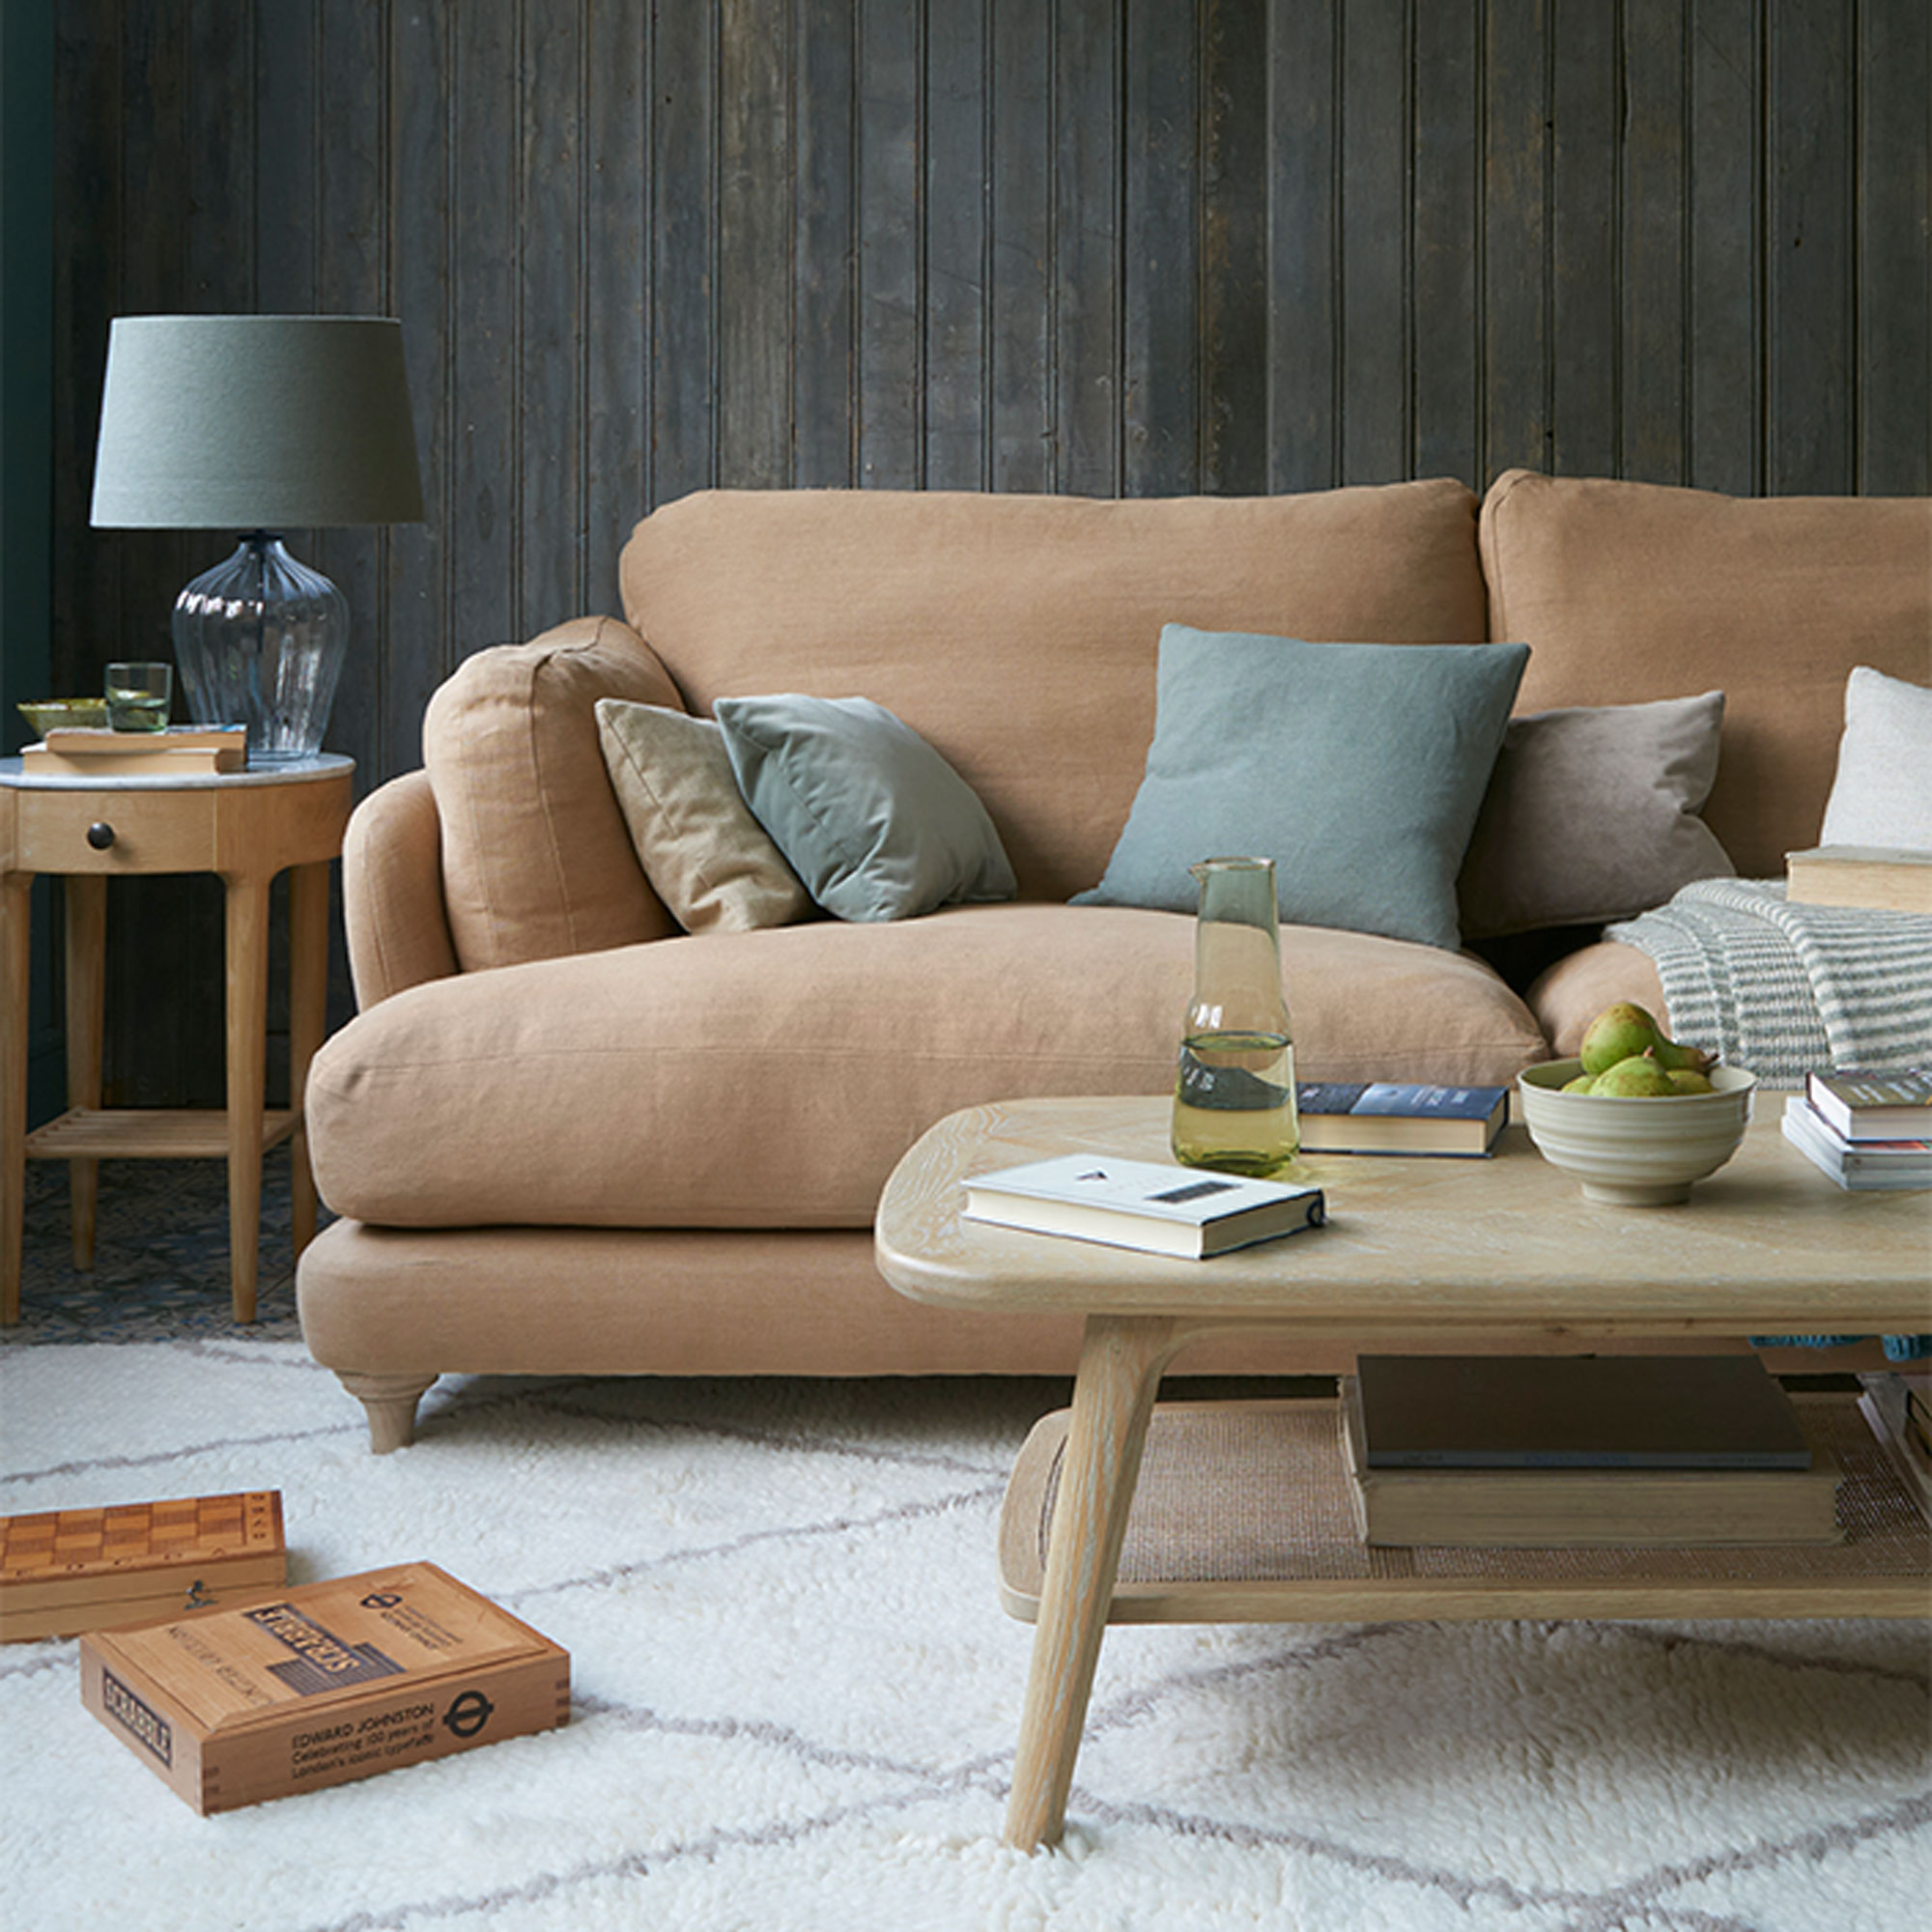 Brown linen sofa with dark wood panelling and berber rug